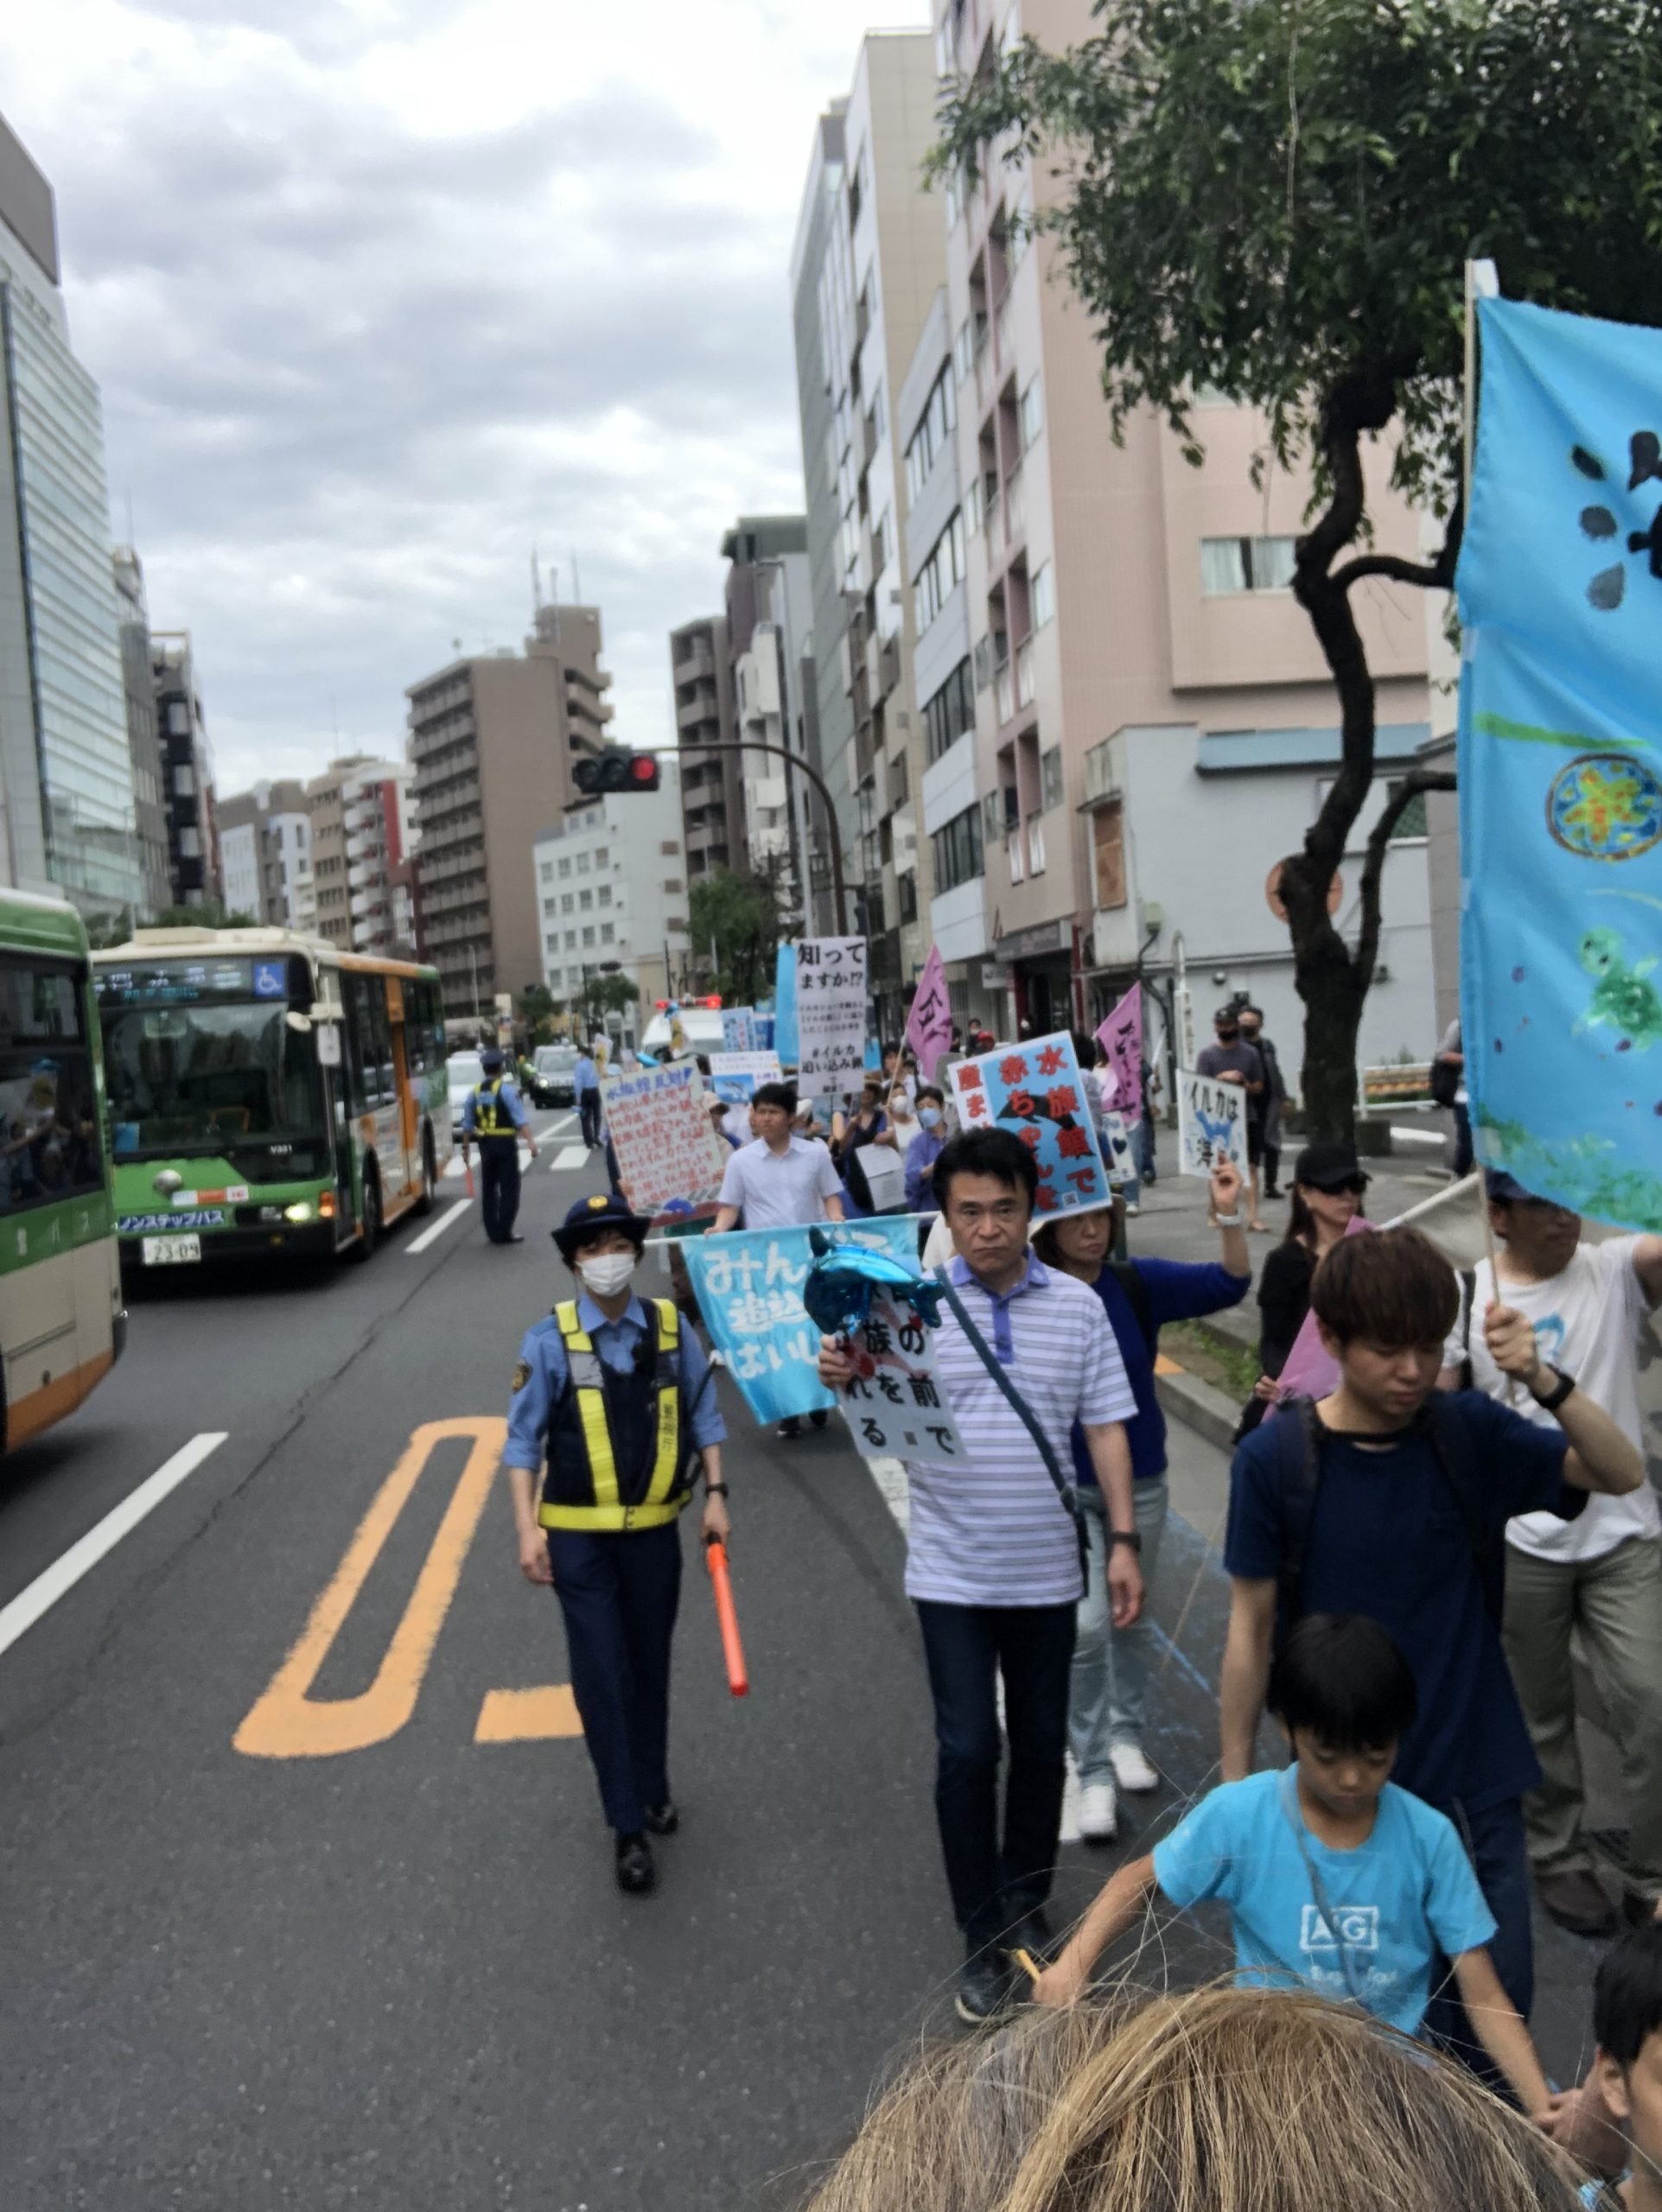 Local whale supporters on march in Japan